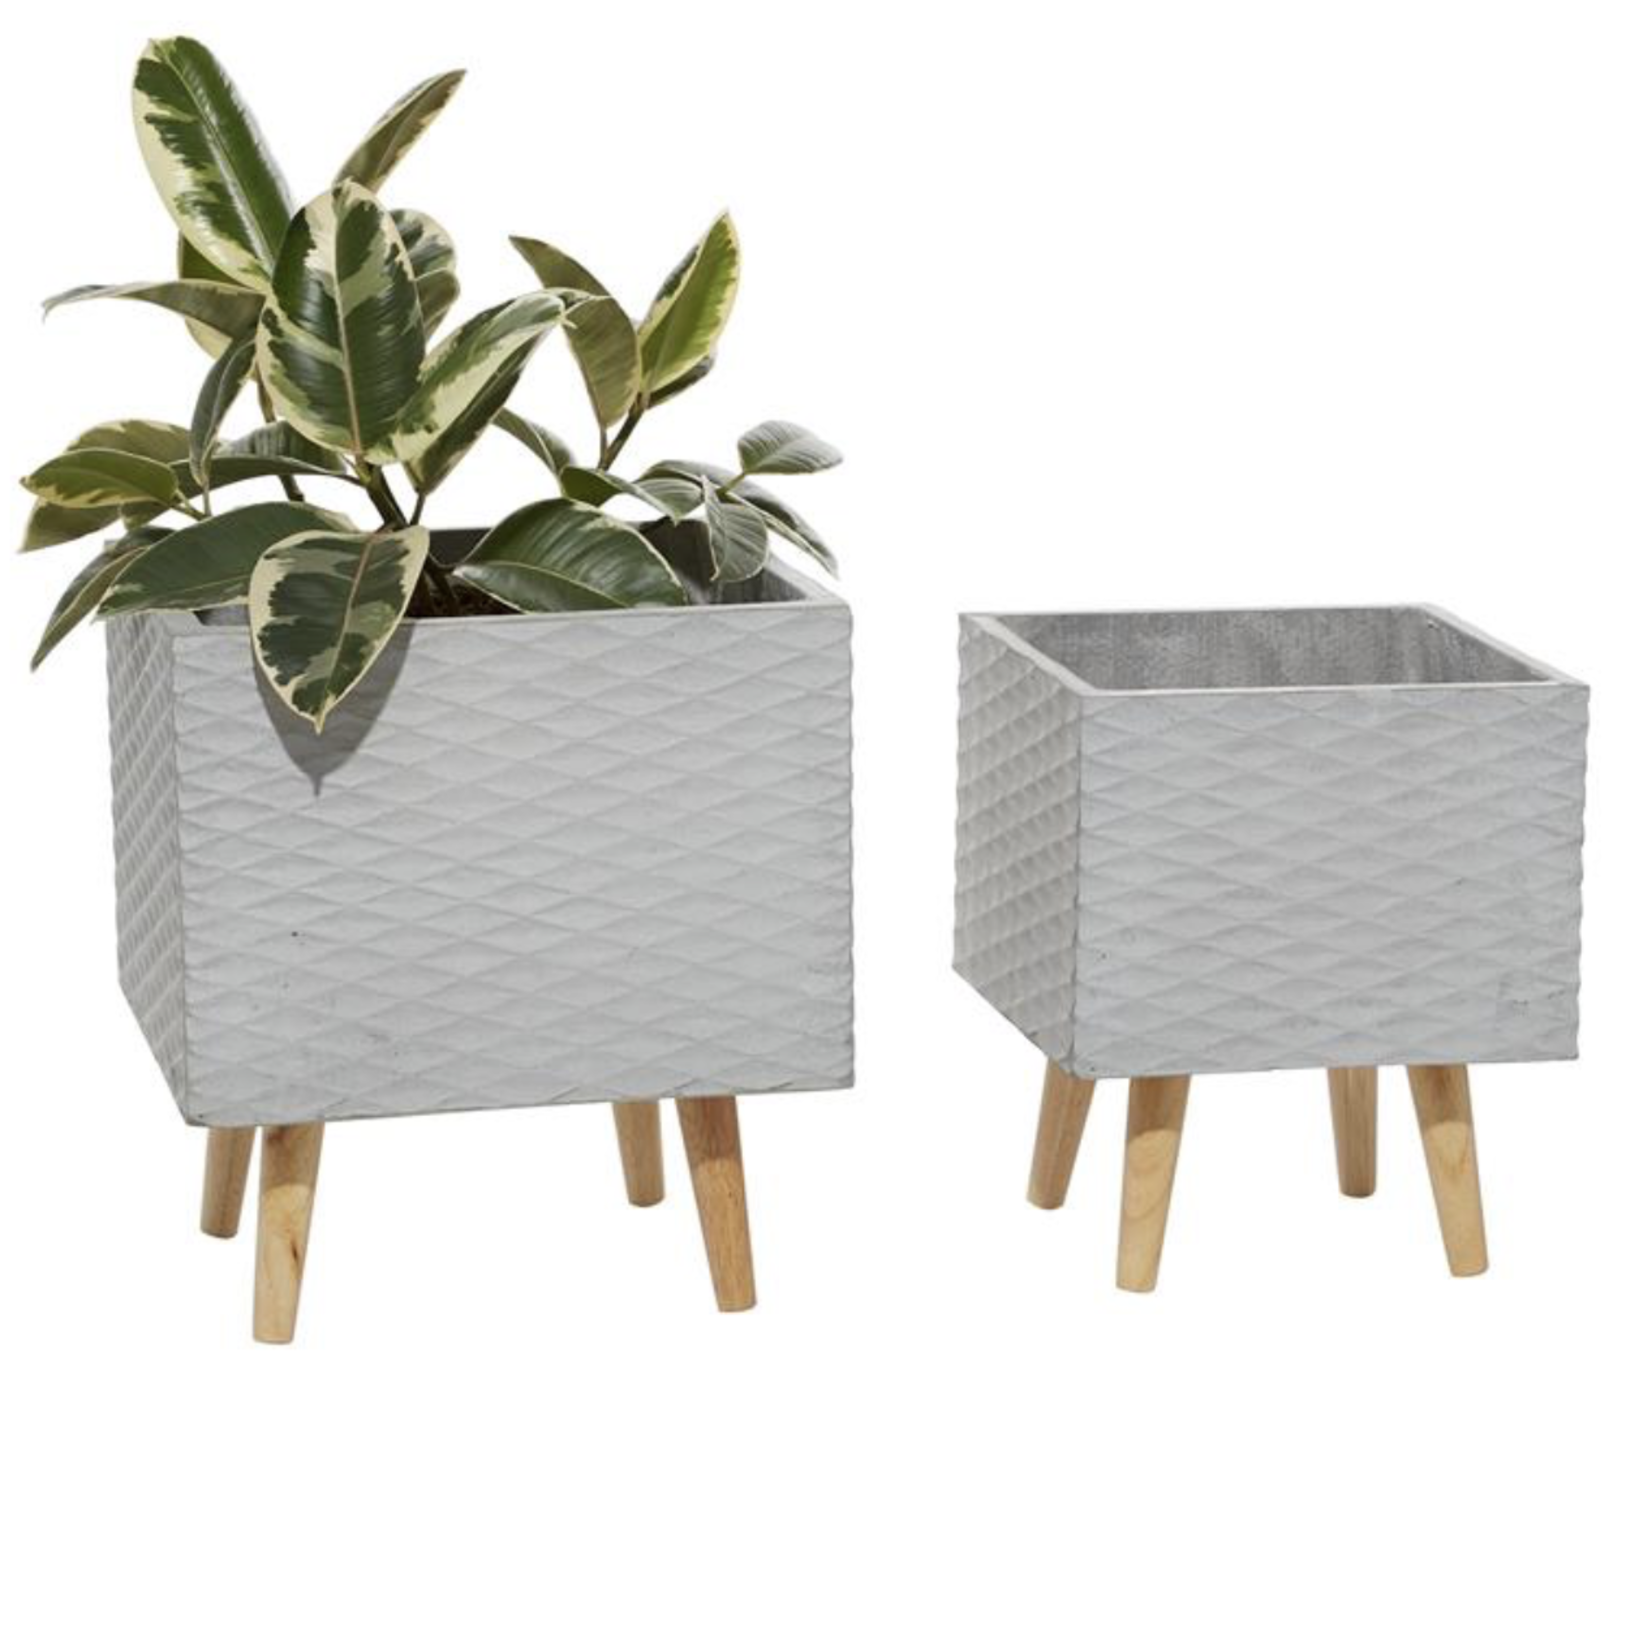 13”H X 11” X 11” SMALL SQUARE GREY CERAMIC CONTEMPORARY PLANTER WITH WOOD STAND (NOT WATER TIGHT)